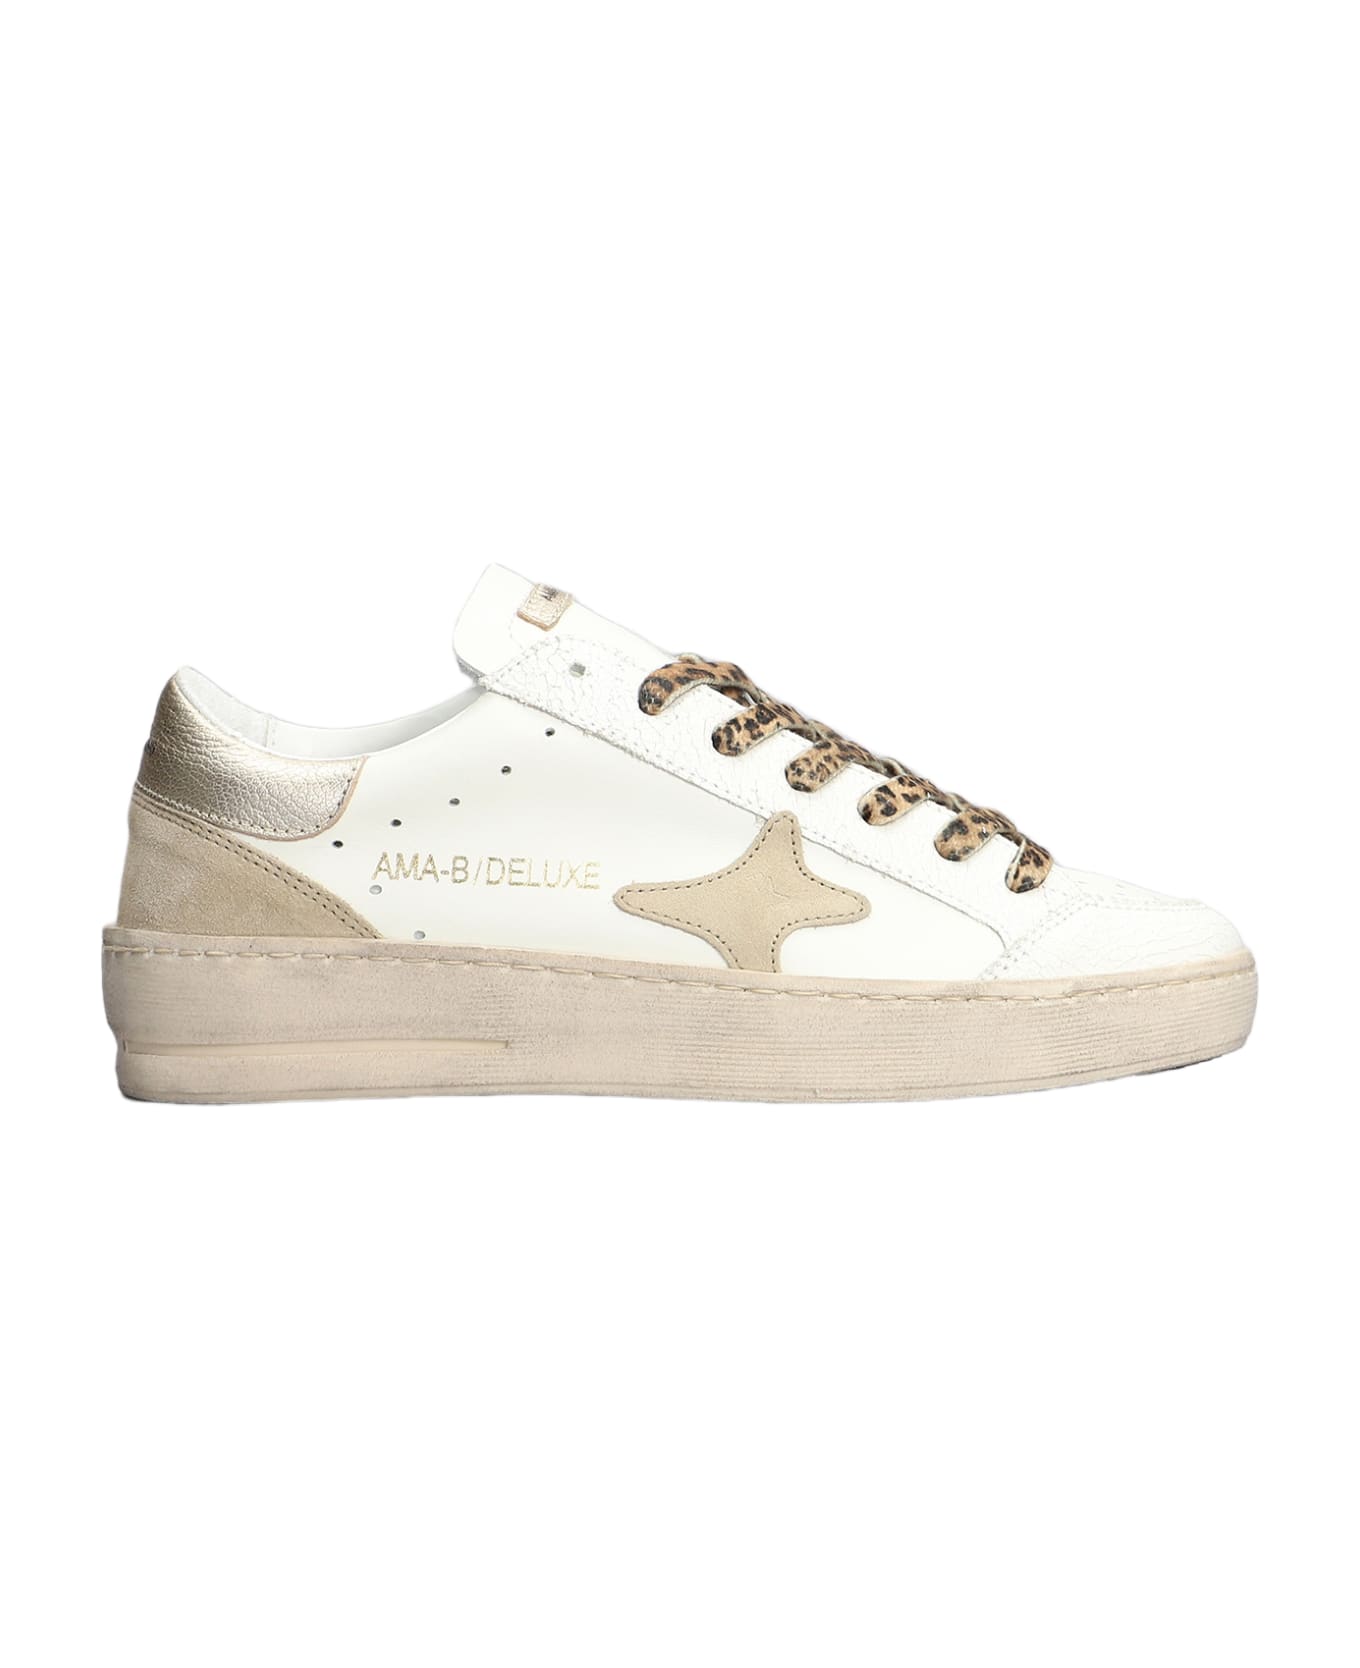 AMA-BRAND Sneakers In White Suede And Leather - white